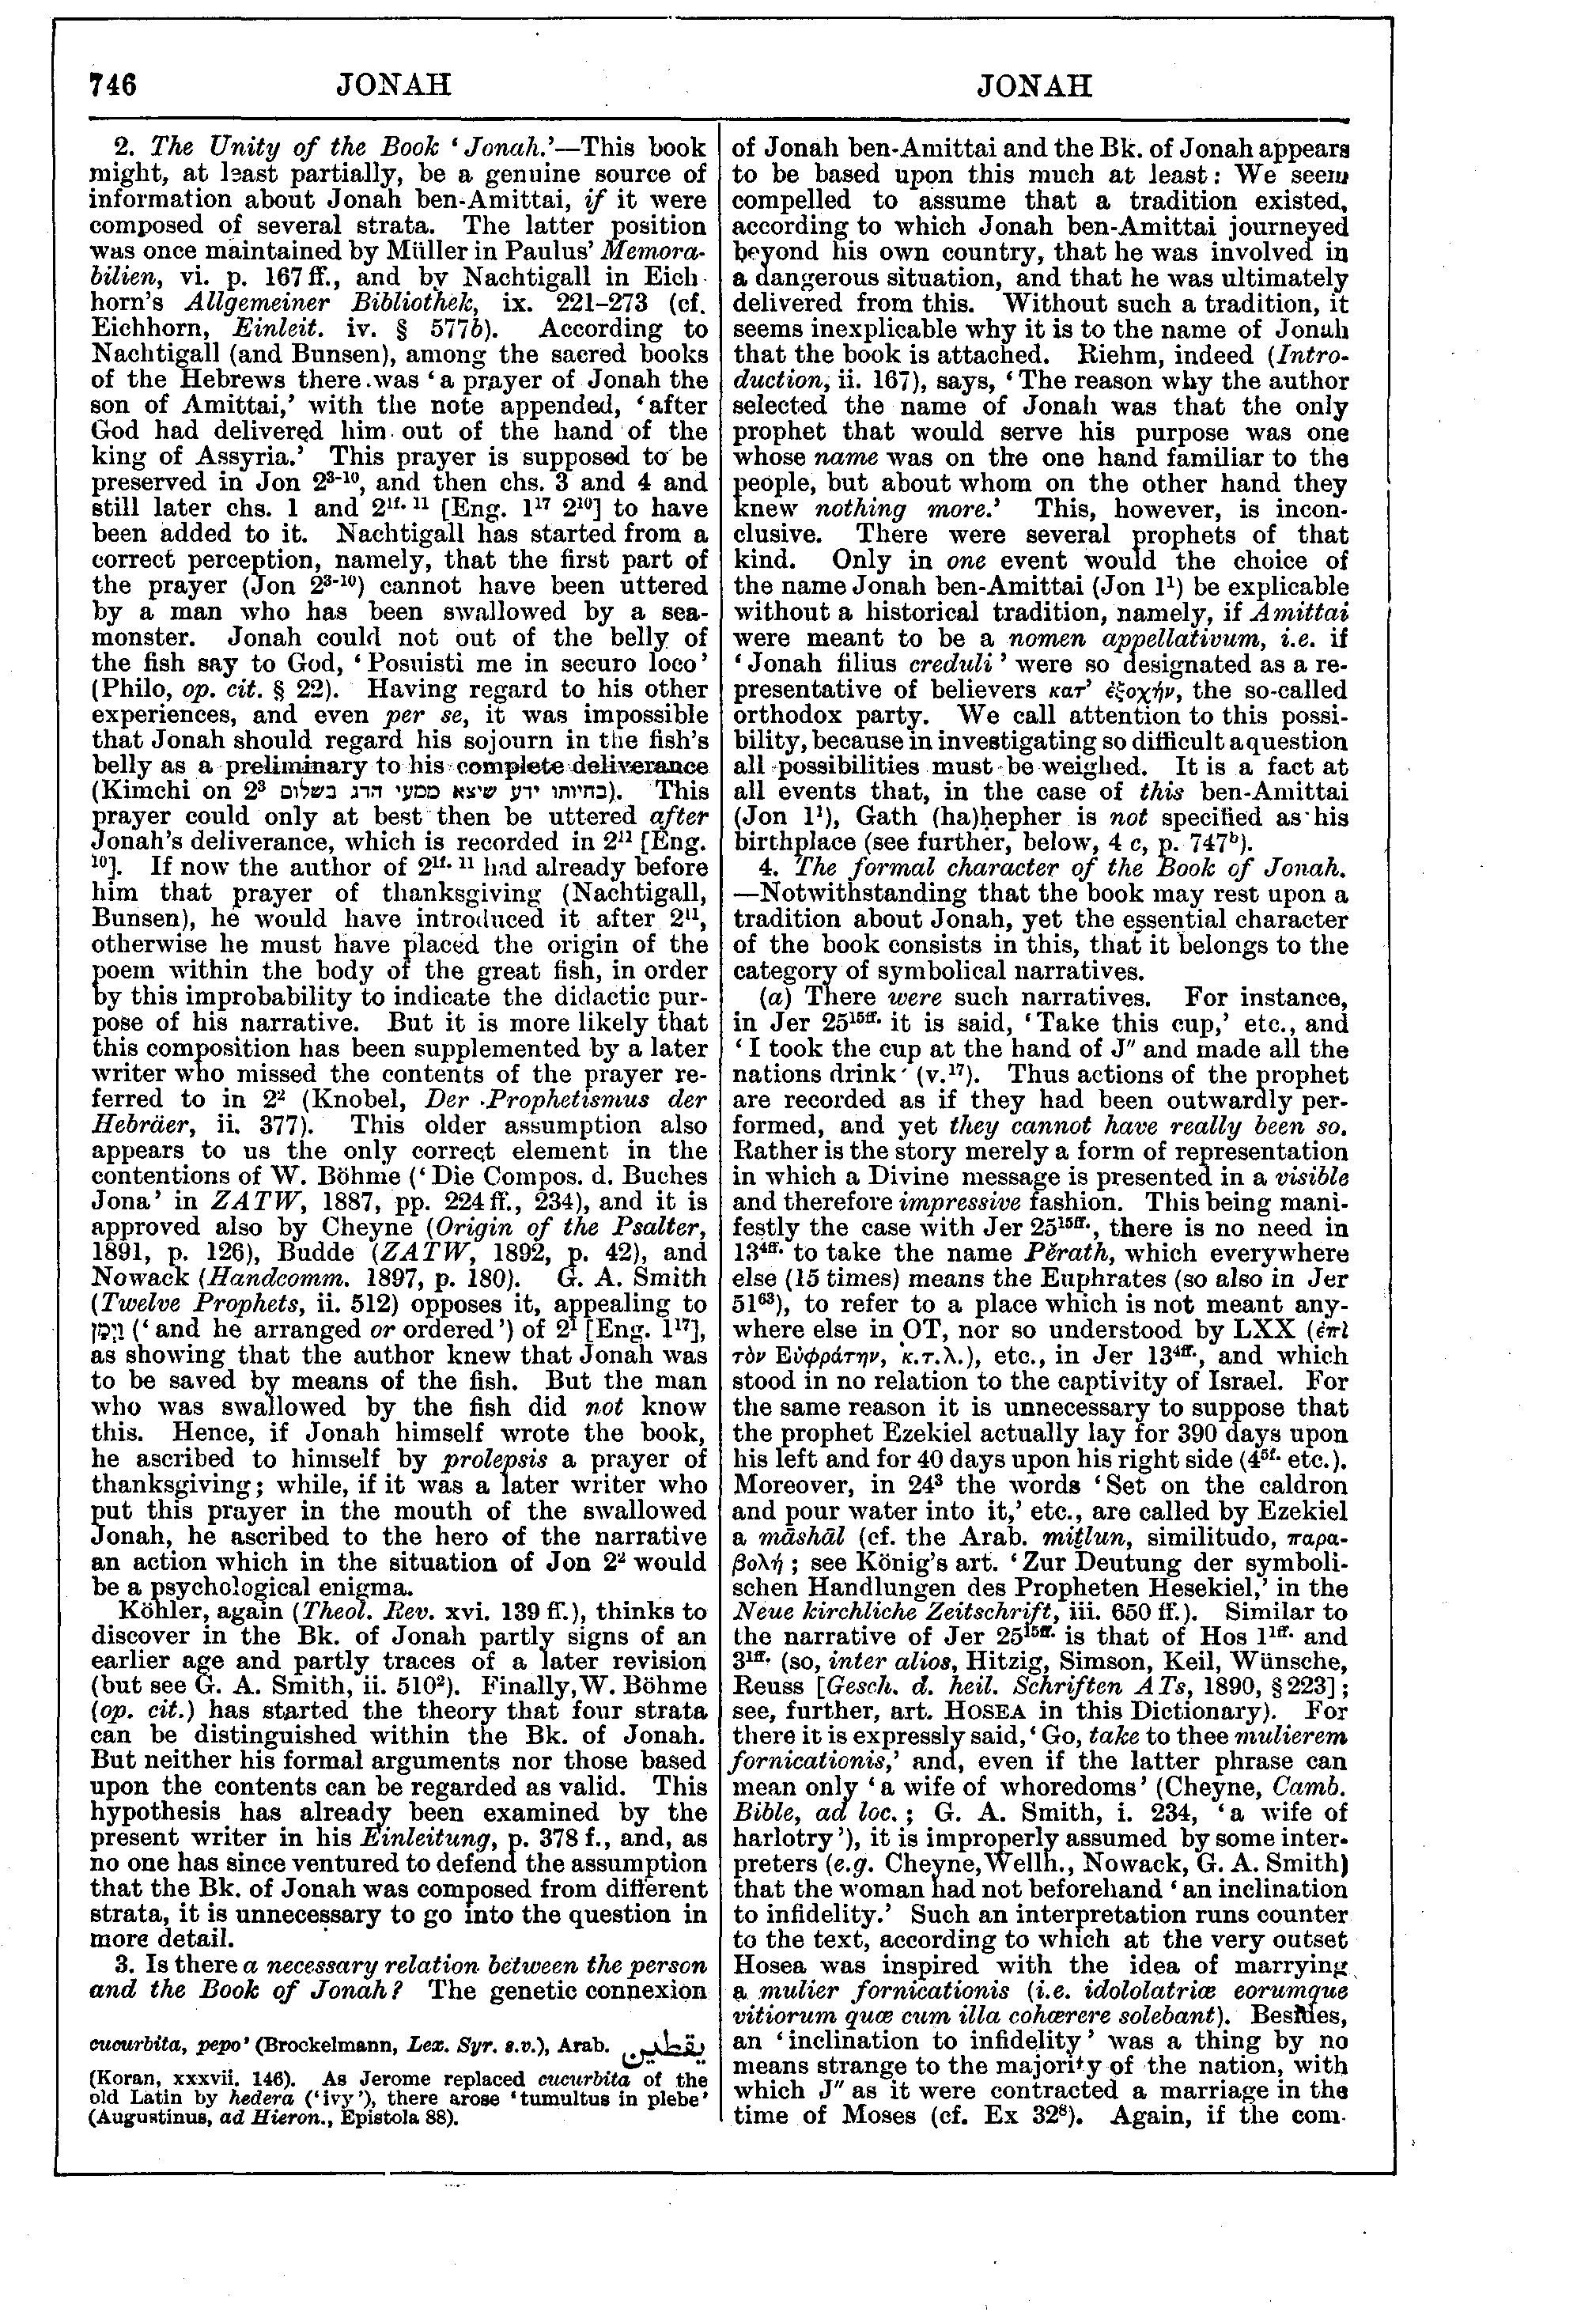 Image of page 746